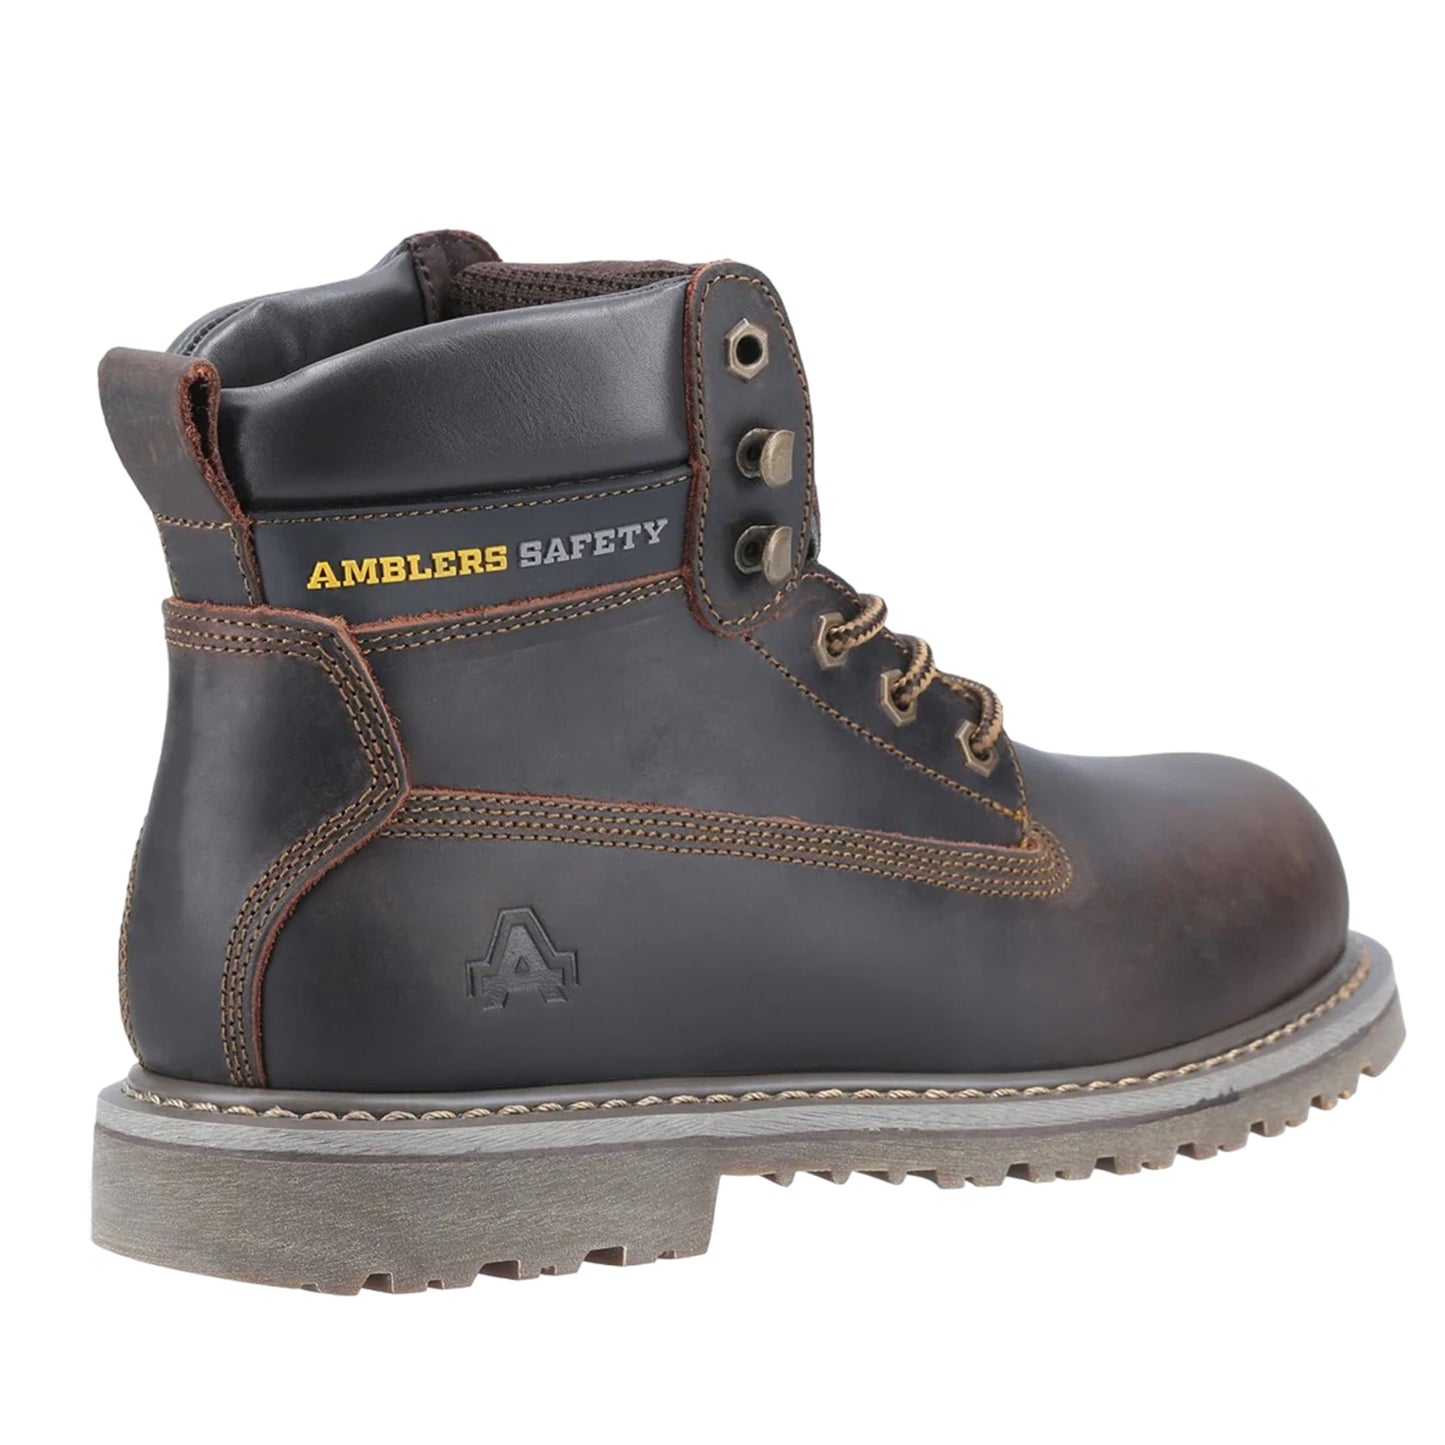 Amblers FS164 Safety Boots